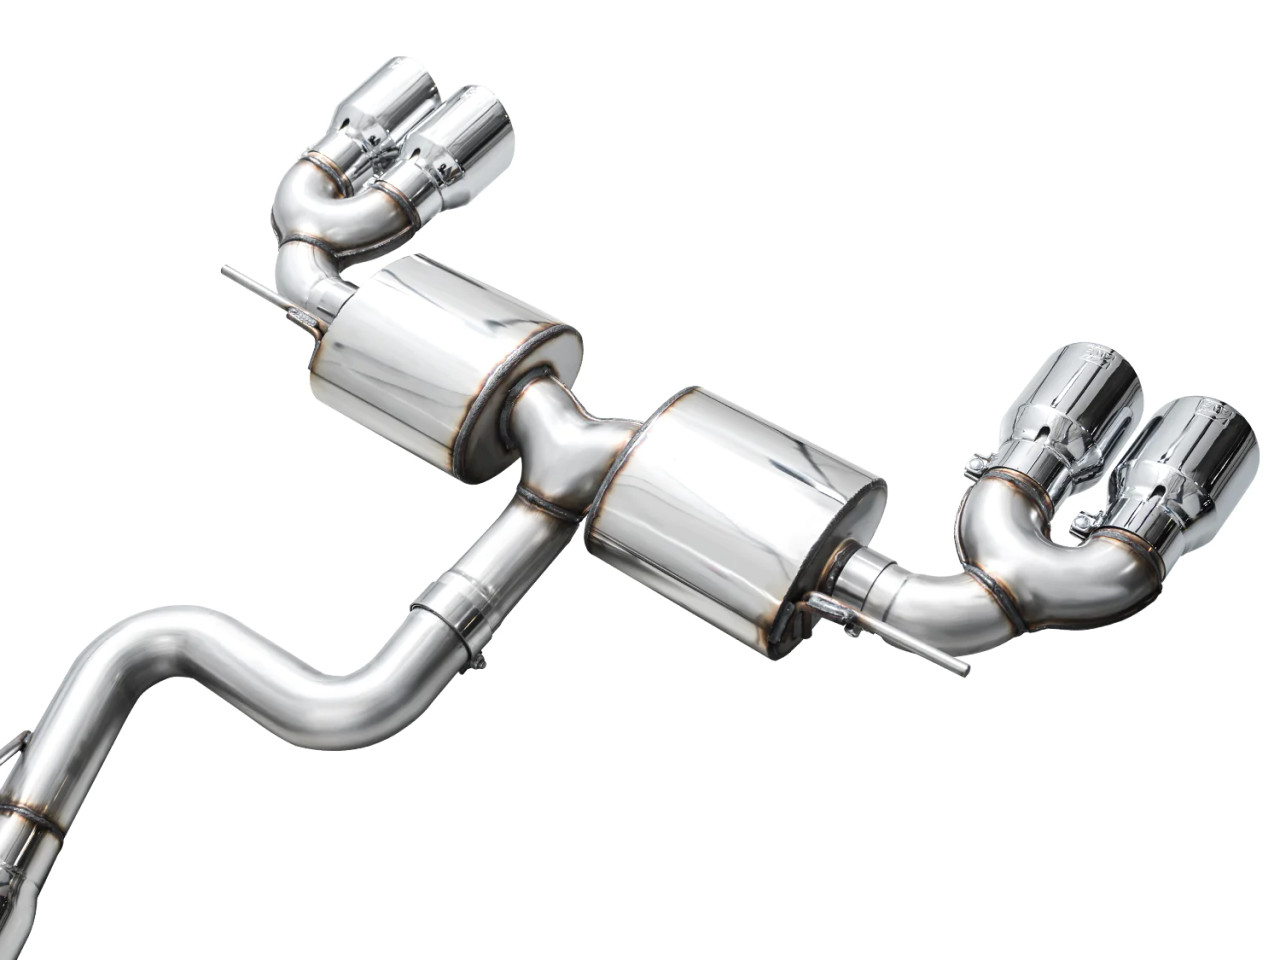 AWE Touring Edition Catback Exhaust for MK8 Golf R